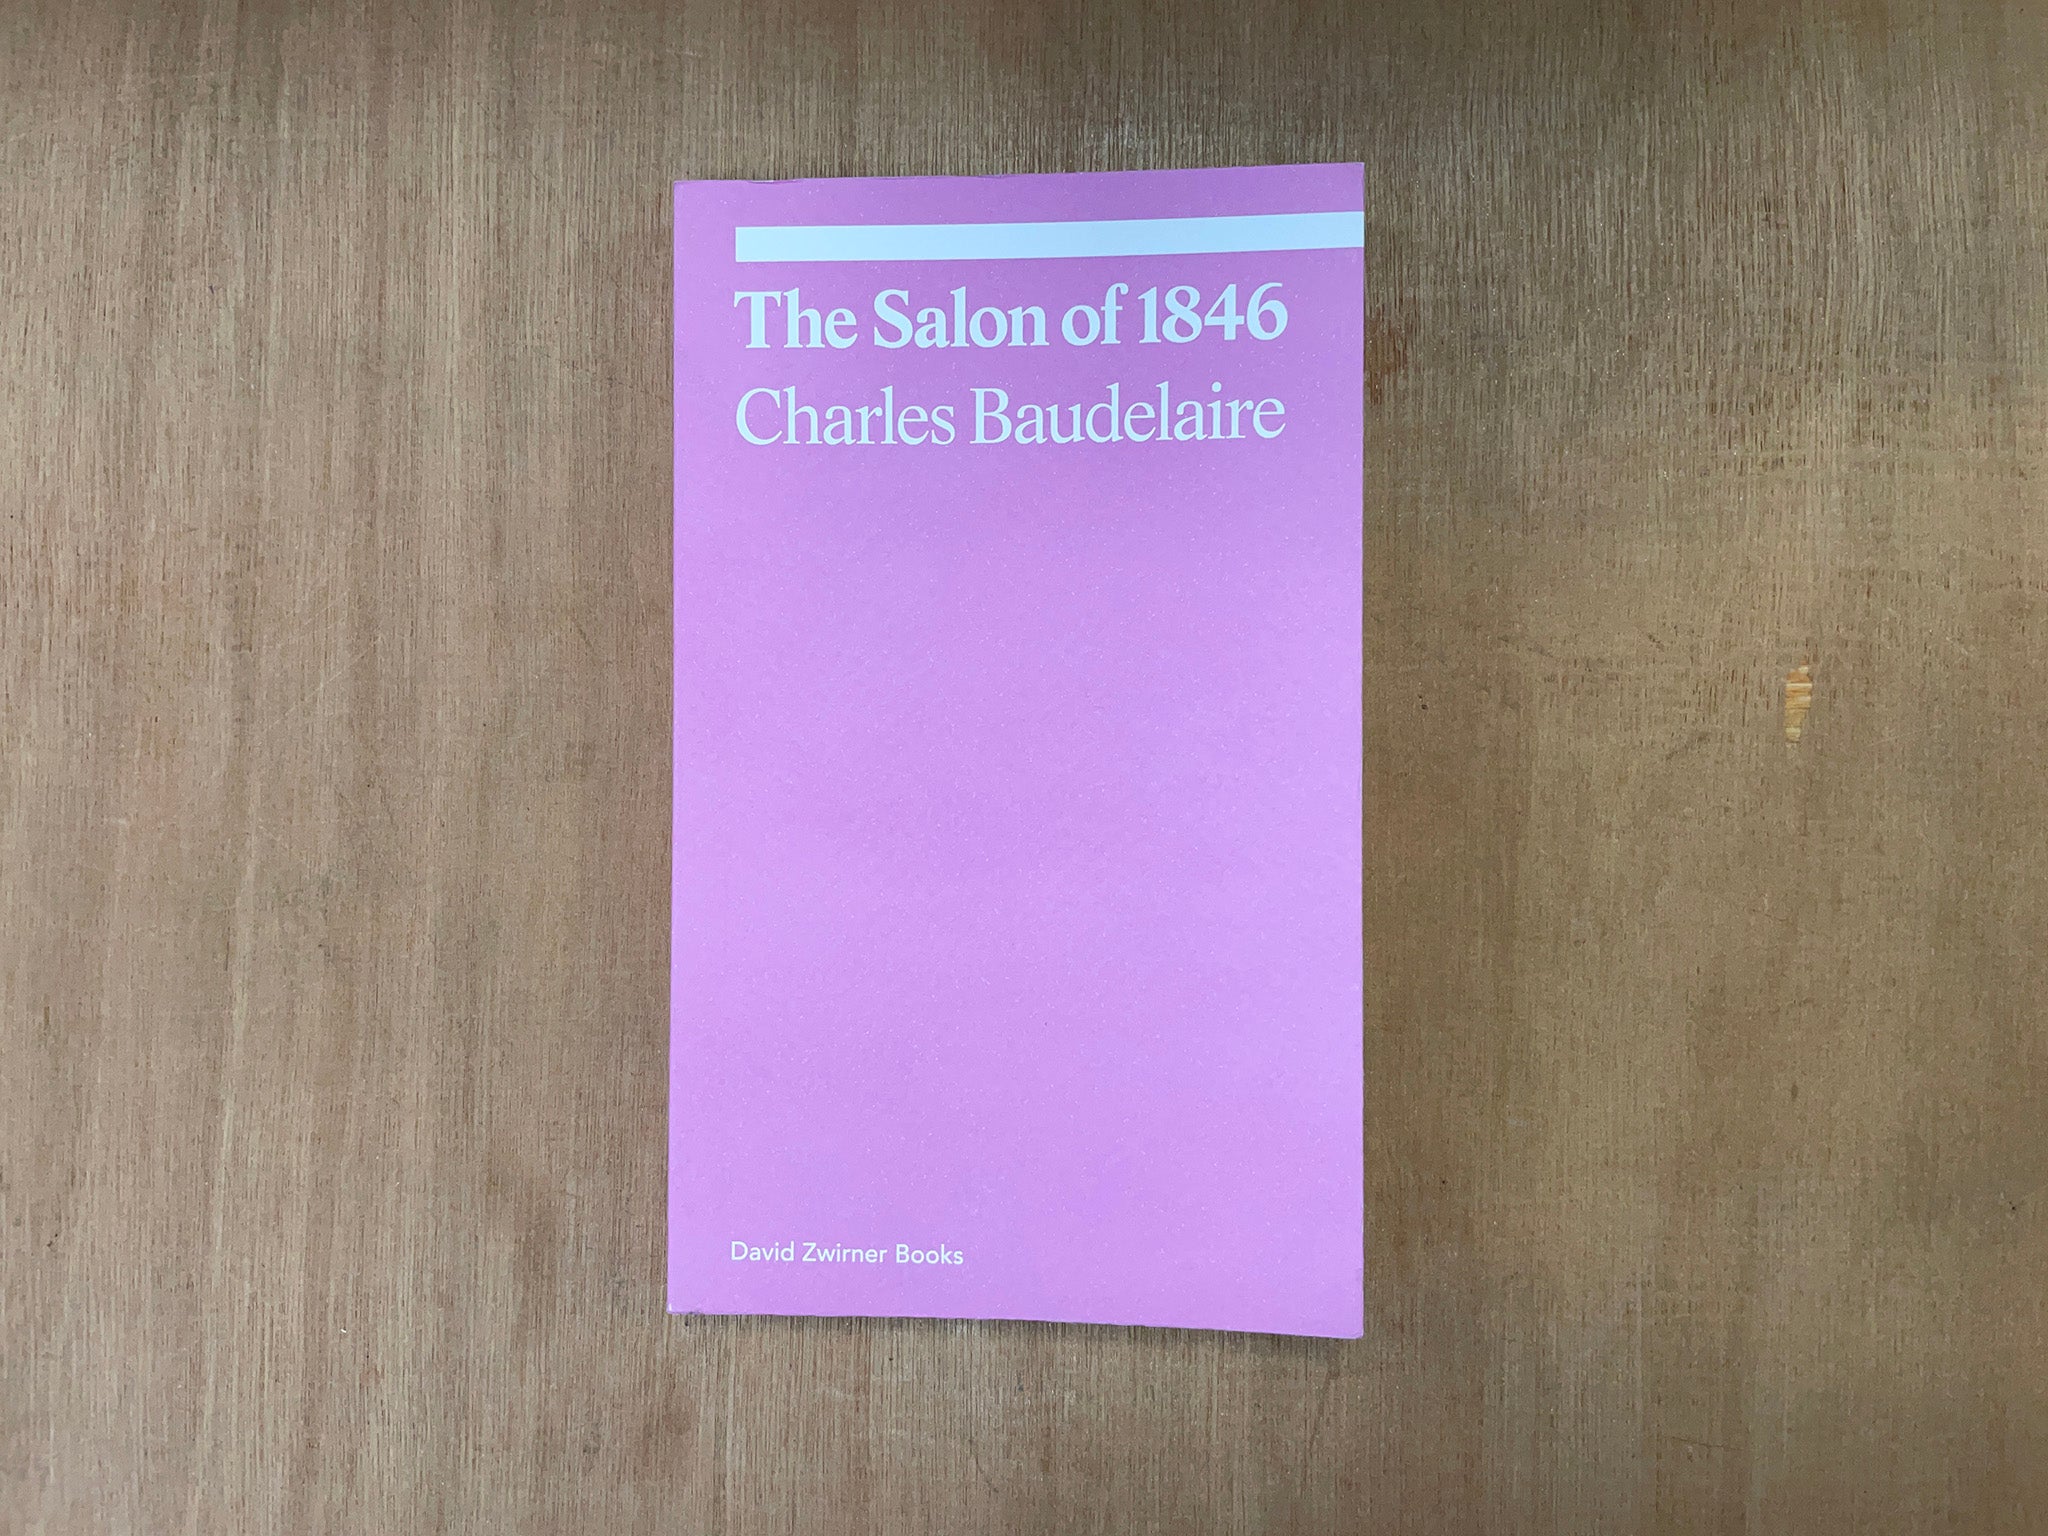 THE SALON OF 1846 by Charles Baudelaire